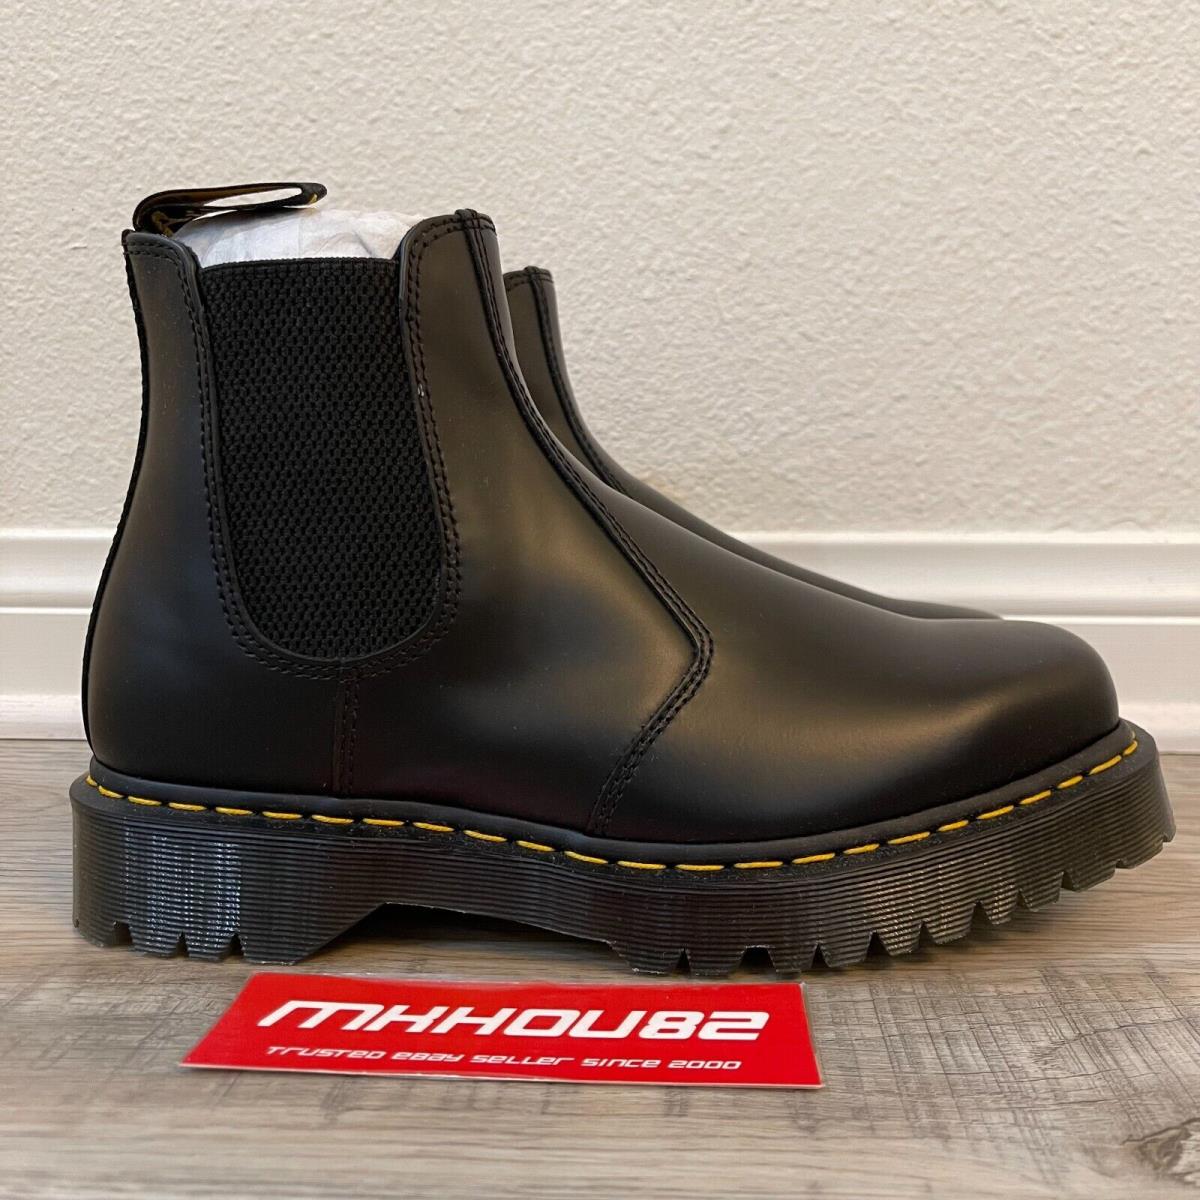 Dr. Martens 2976 Bex Squared Smooth Leather Chelsea Boots Black Size 11 Mens